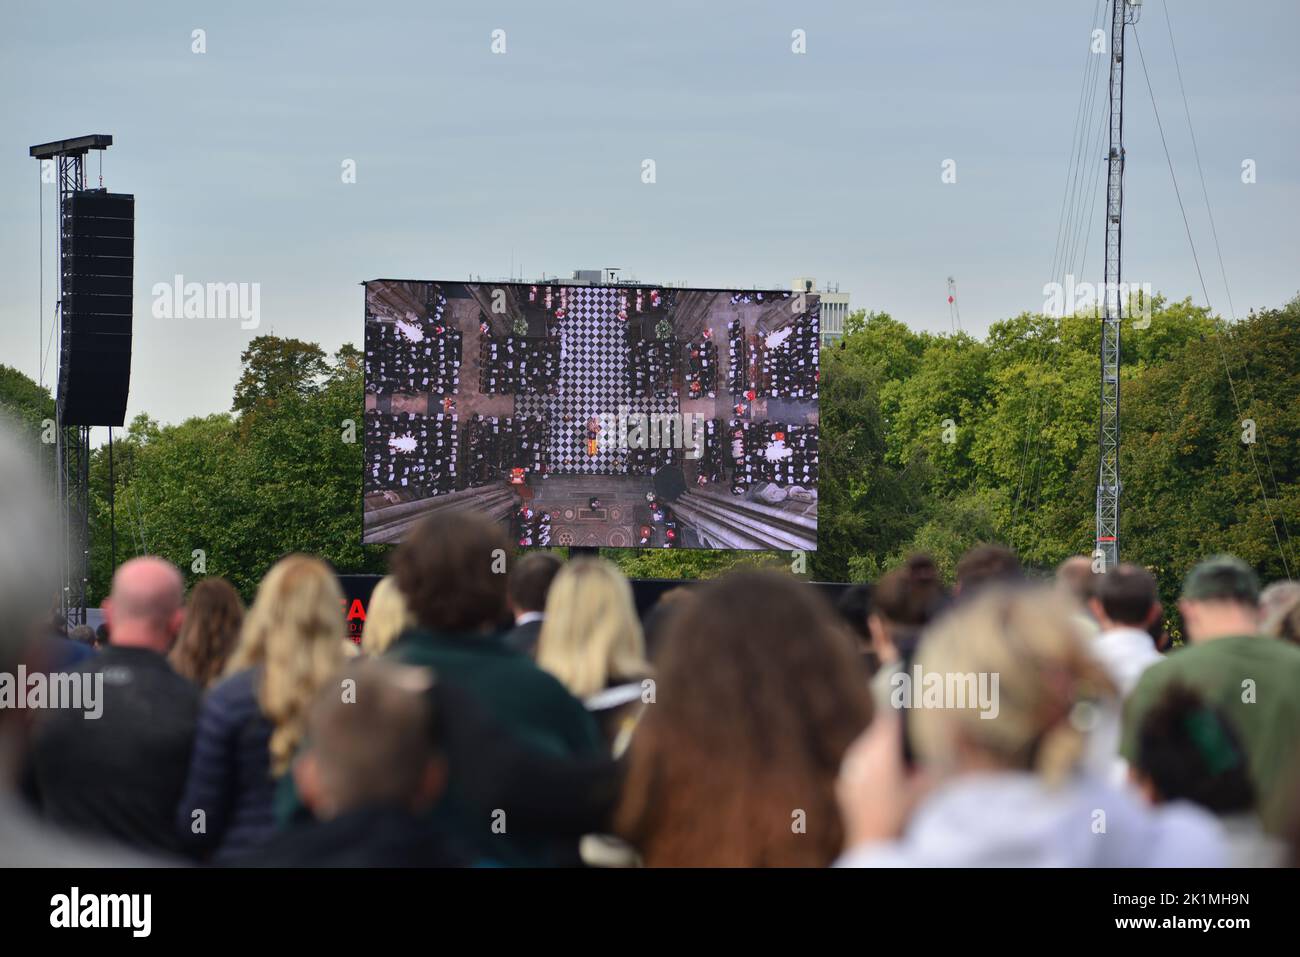 State funeral of Her Majesty Queen Elizabeth II, London, UK, Monday 19th September 2022. Crowds of people watching the ceremony from Westminster Abbey on a big screen in Hyde Park. Stock Photo